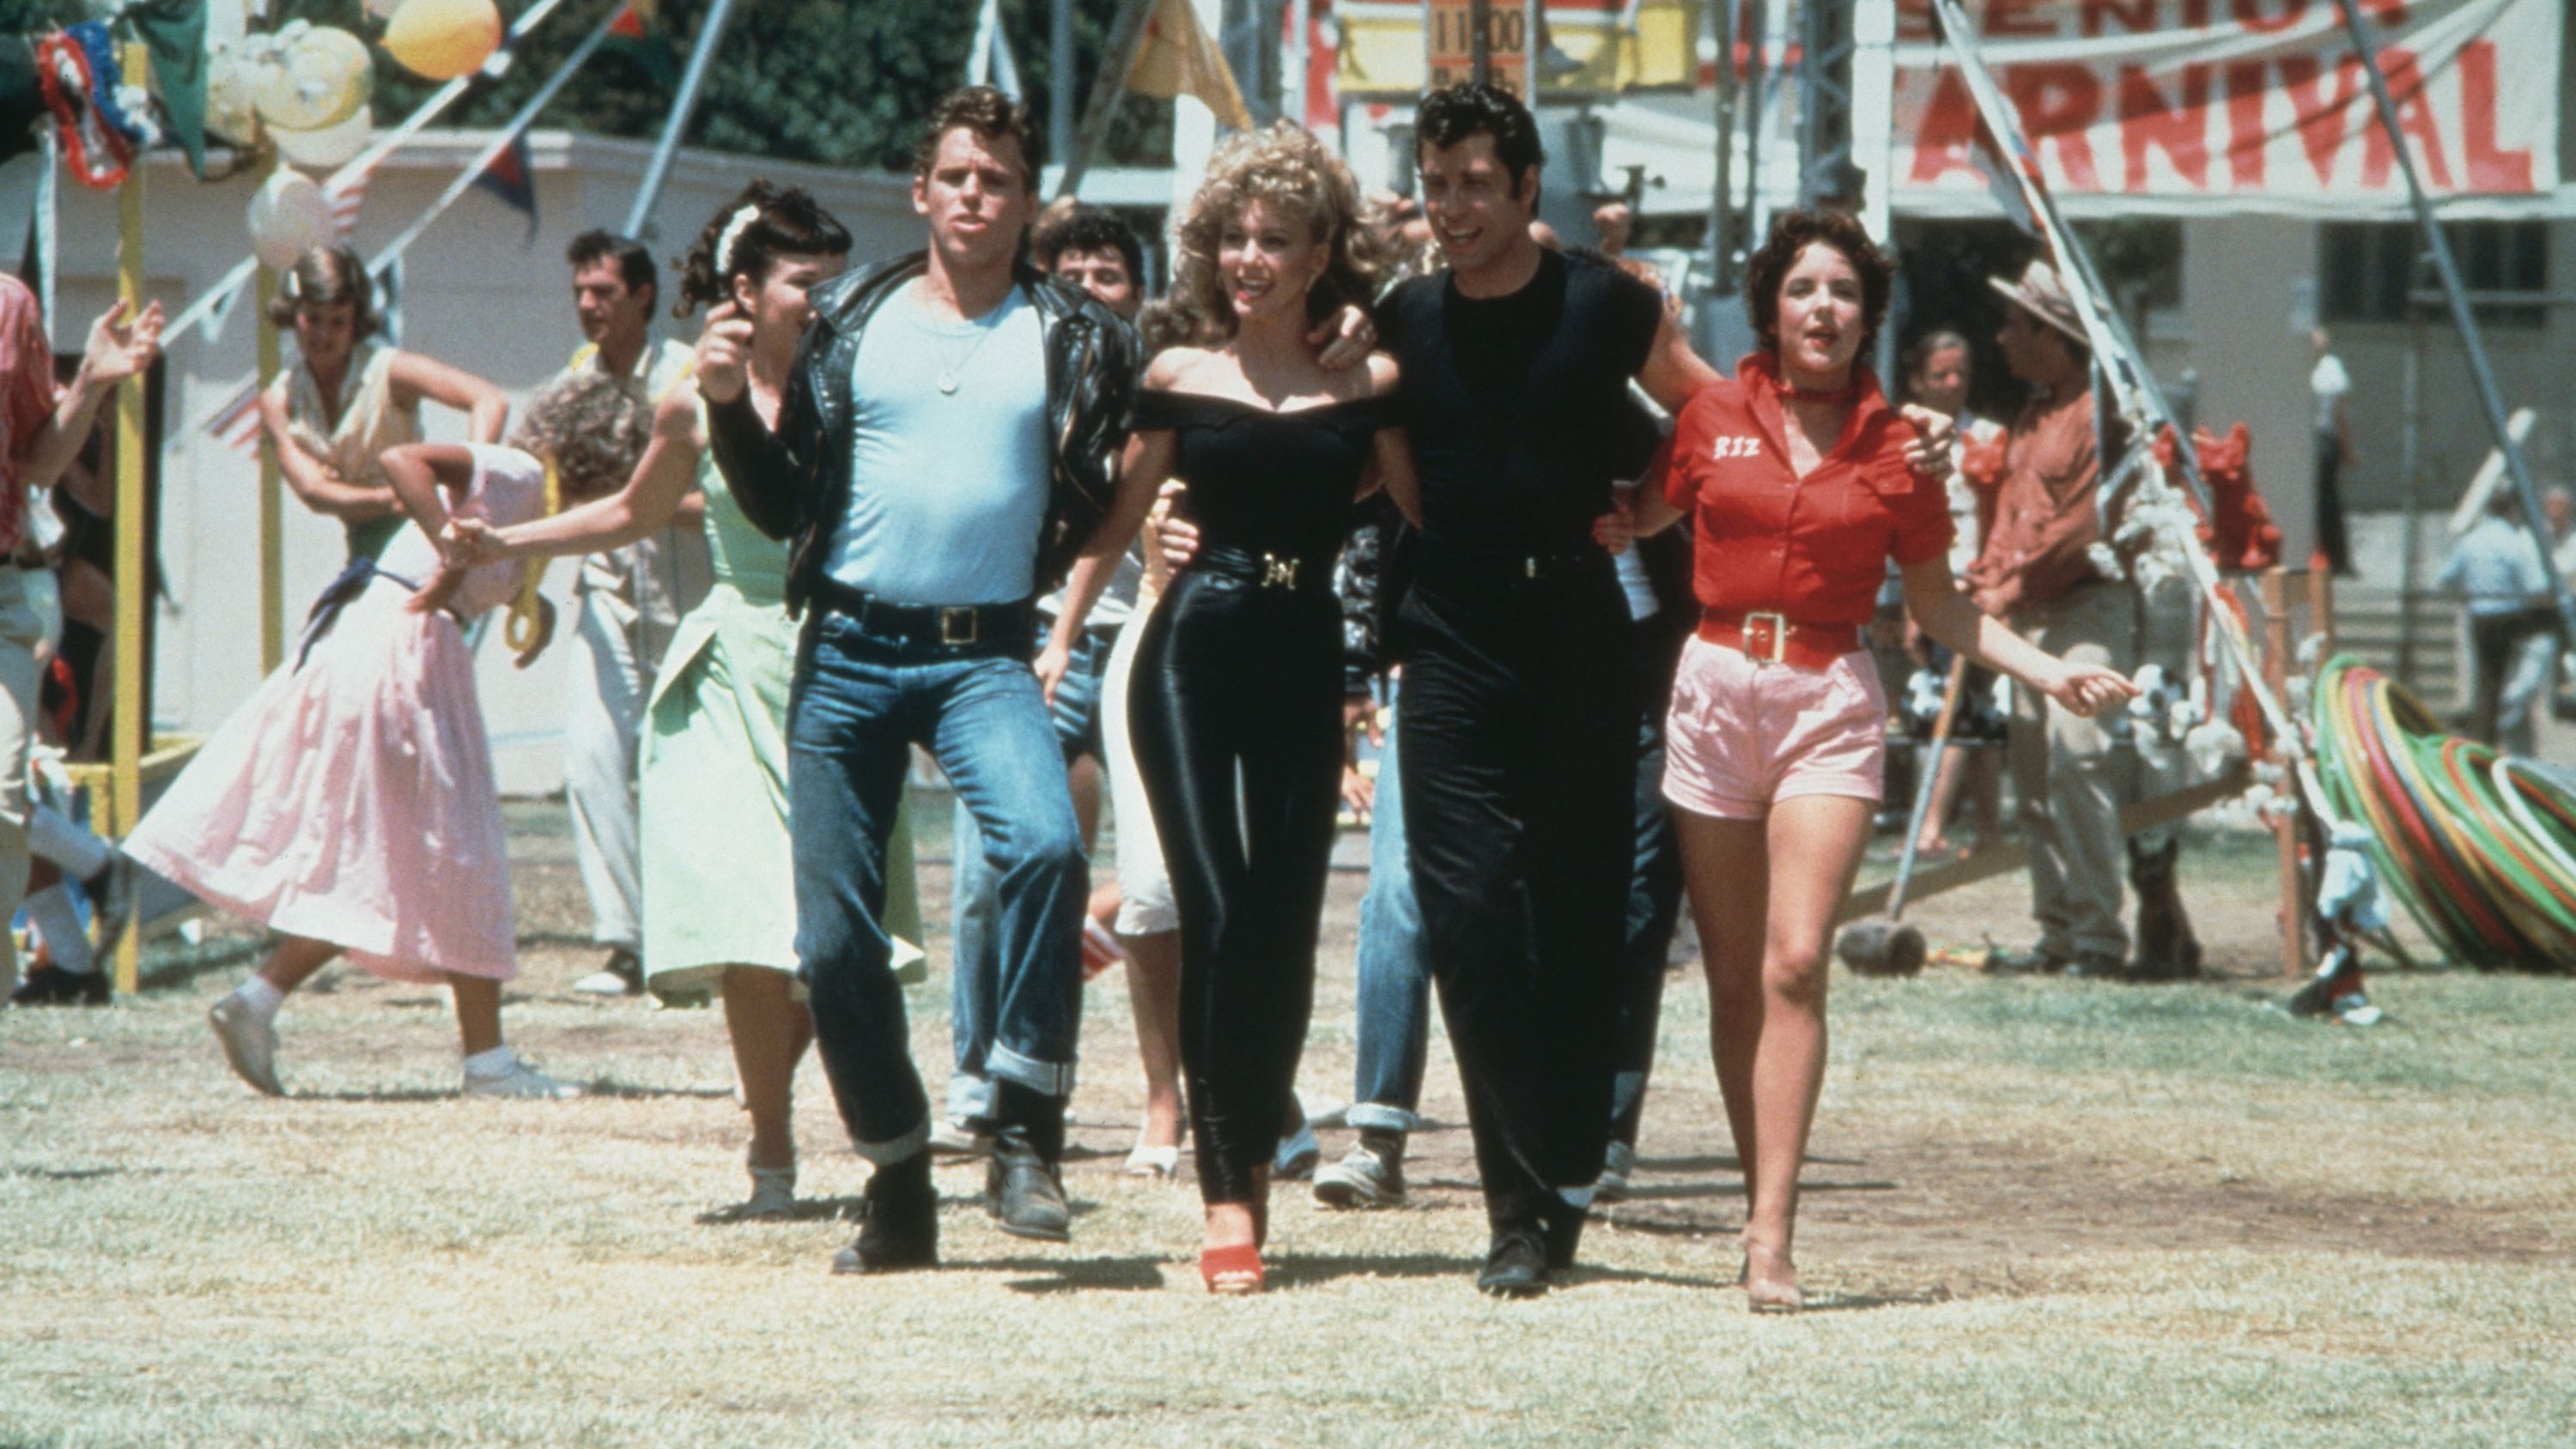 <strong>"Grease" (1978):</strong> Danny (John Travolta) and Sandy (Olivia Newton-John) come from very different backgrounds, but they enjoyed a summer romance before being reunited unexpectedly at school, singing the duet "Summer Nights," where they share very different memories about the romance quotient of what transpired between them. Of course, the complications, breakup and making up follow, but oh, those summer ni-ights.<br /> 